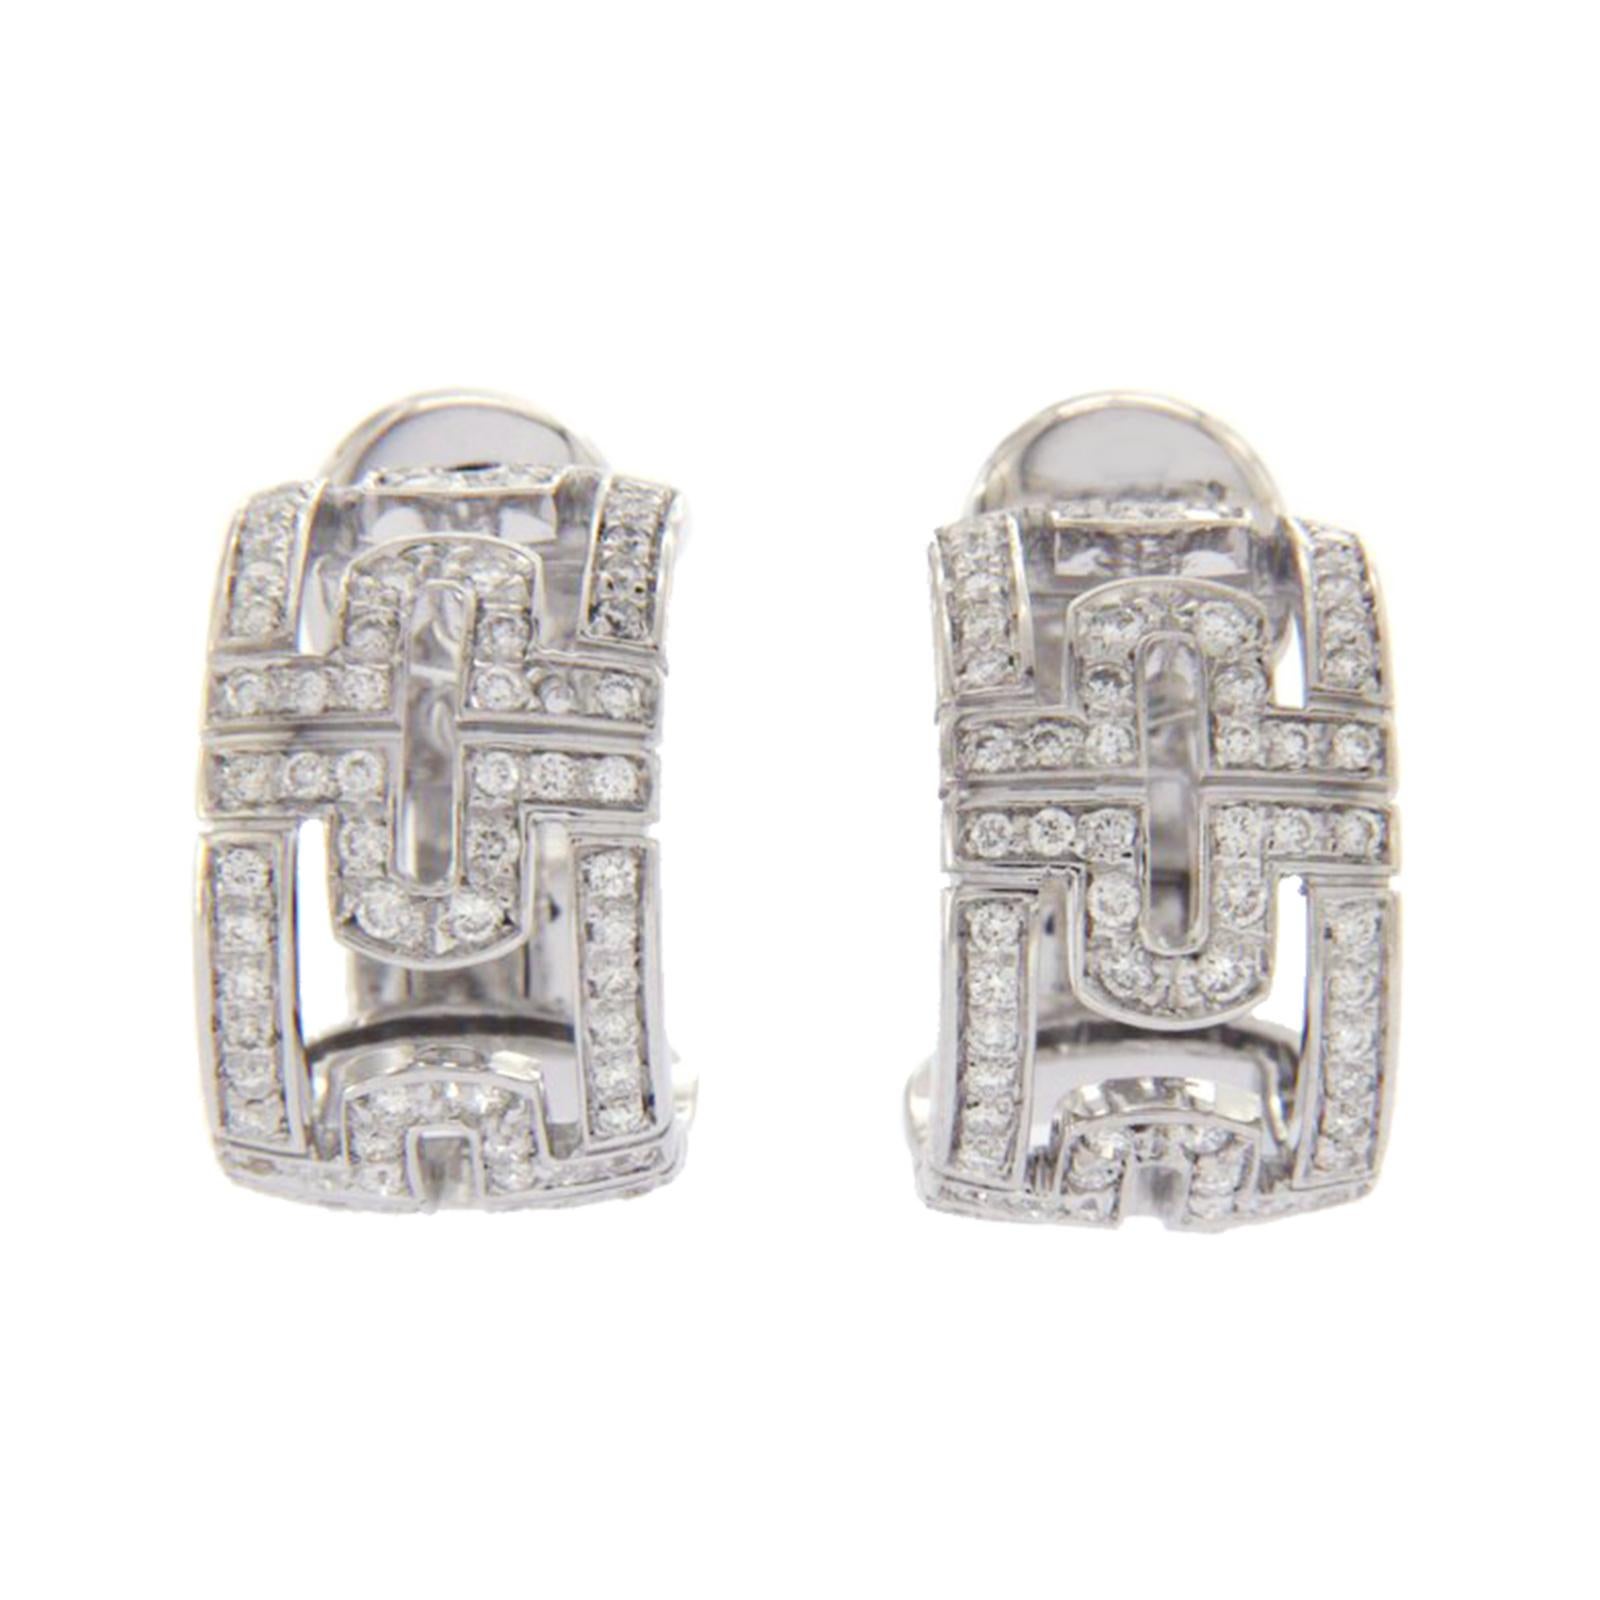 Height: 15.5 mm
Width: 9.5 mm
Metal:18K White Gold
Hallmarks: BVLGARI 750
Total Weight: 10.1 Grams
Stone Type: 0.80 CT Diamonds
Condition: Pre-owned
Estimated Retail Price: $8250
Stock Number: U510